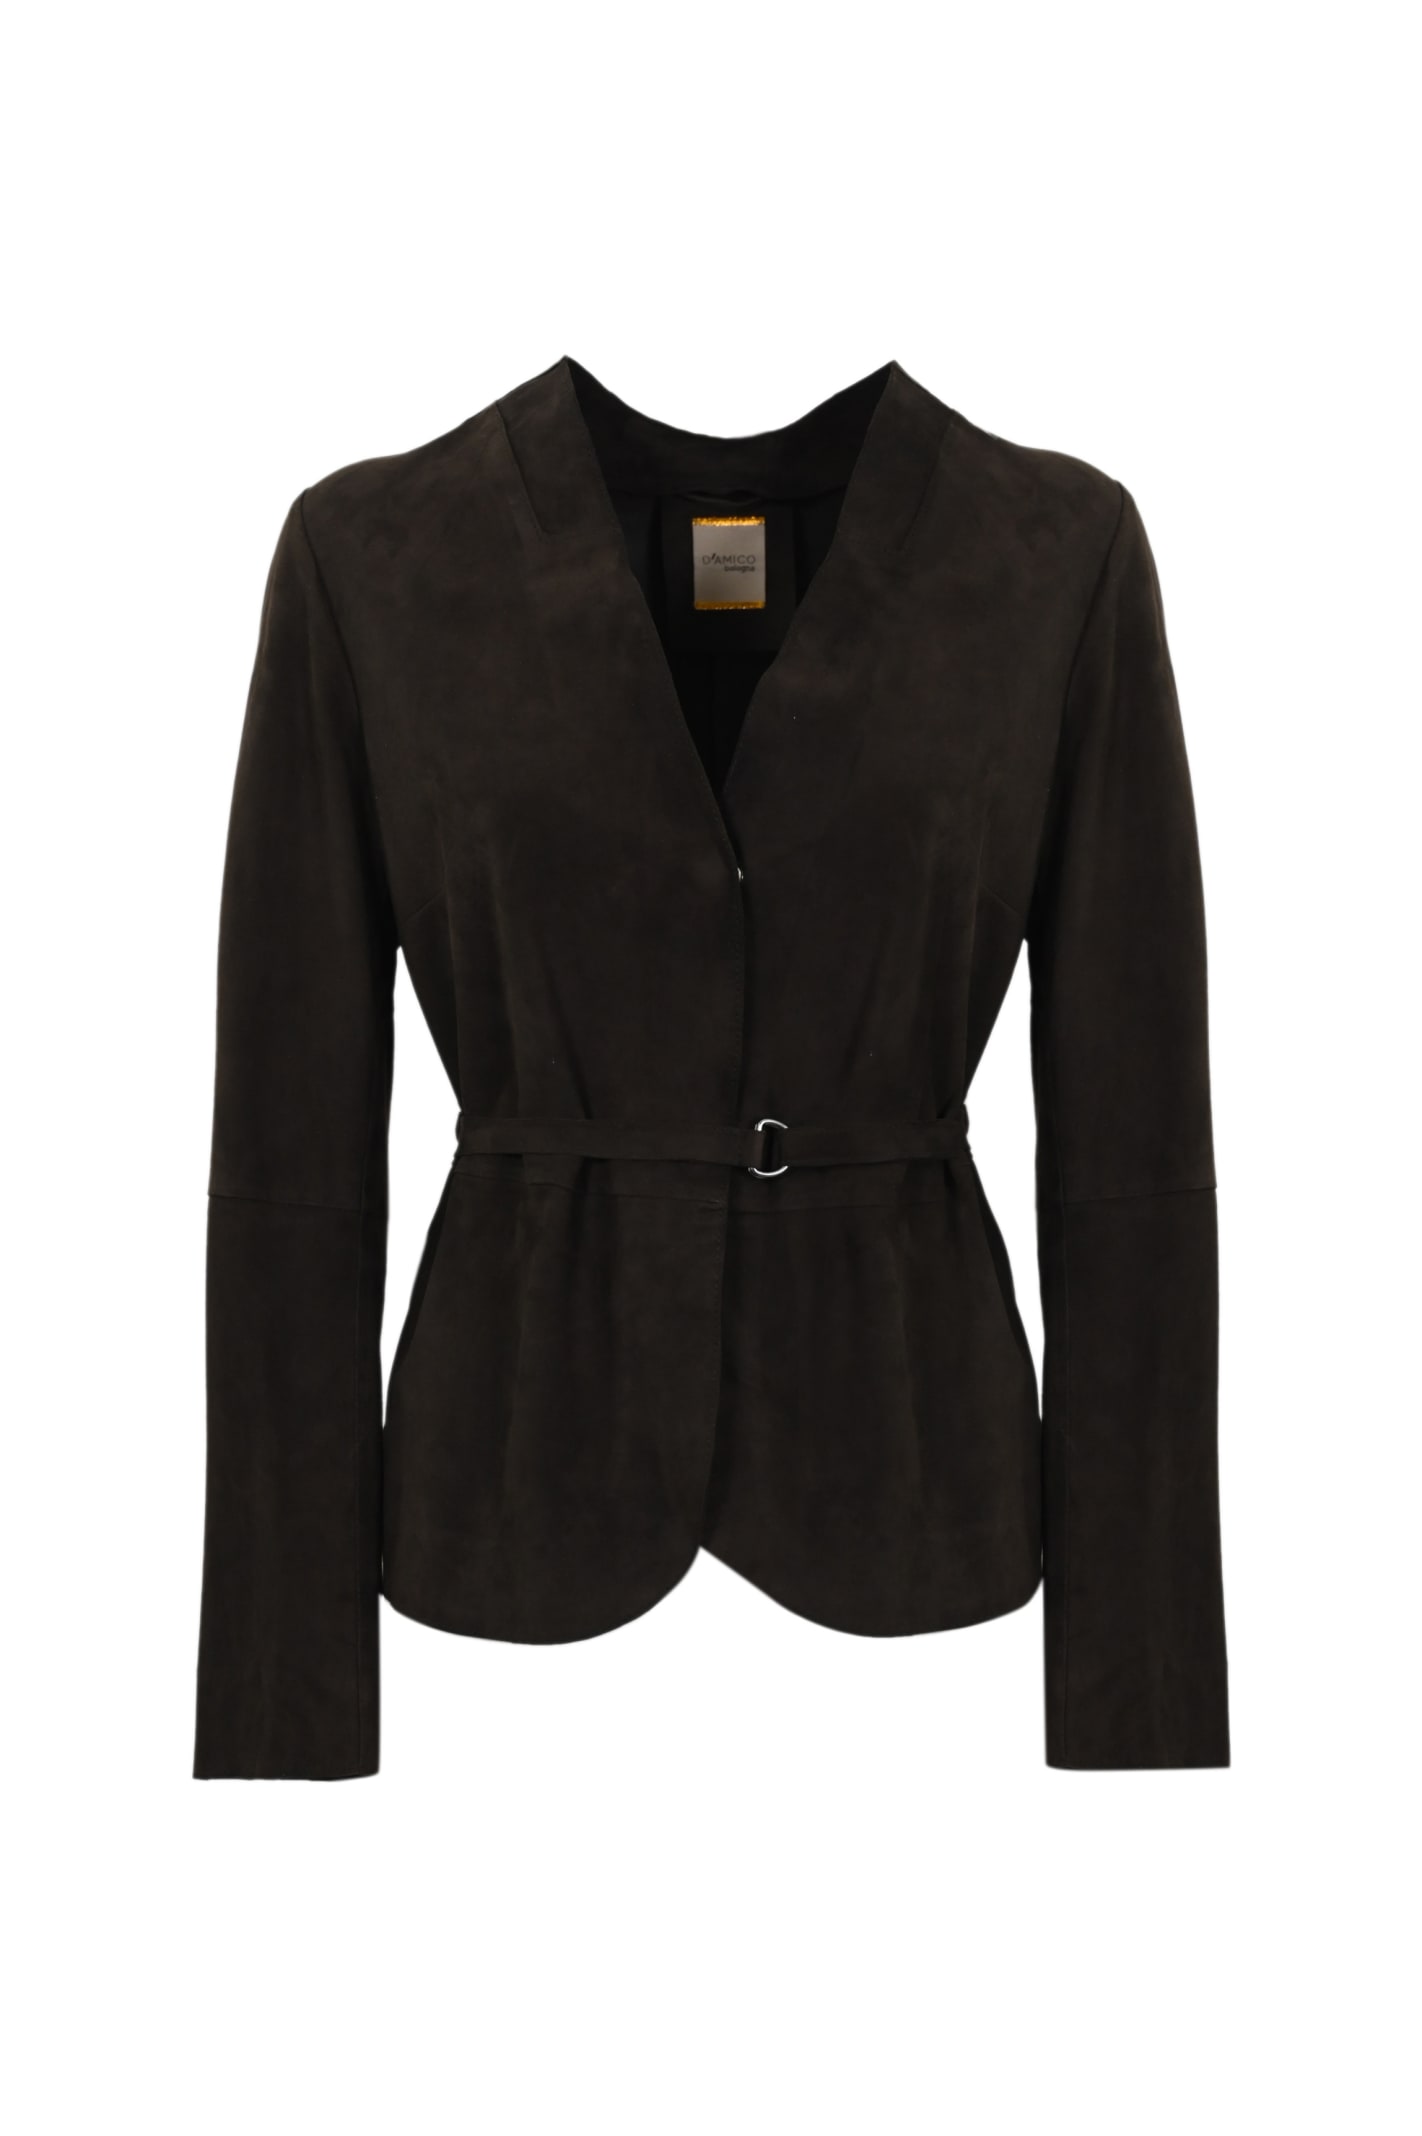 D'amico Brown Suede Jacket In Caffe